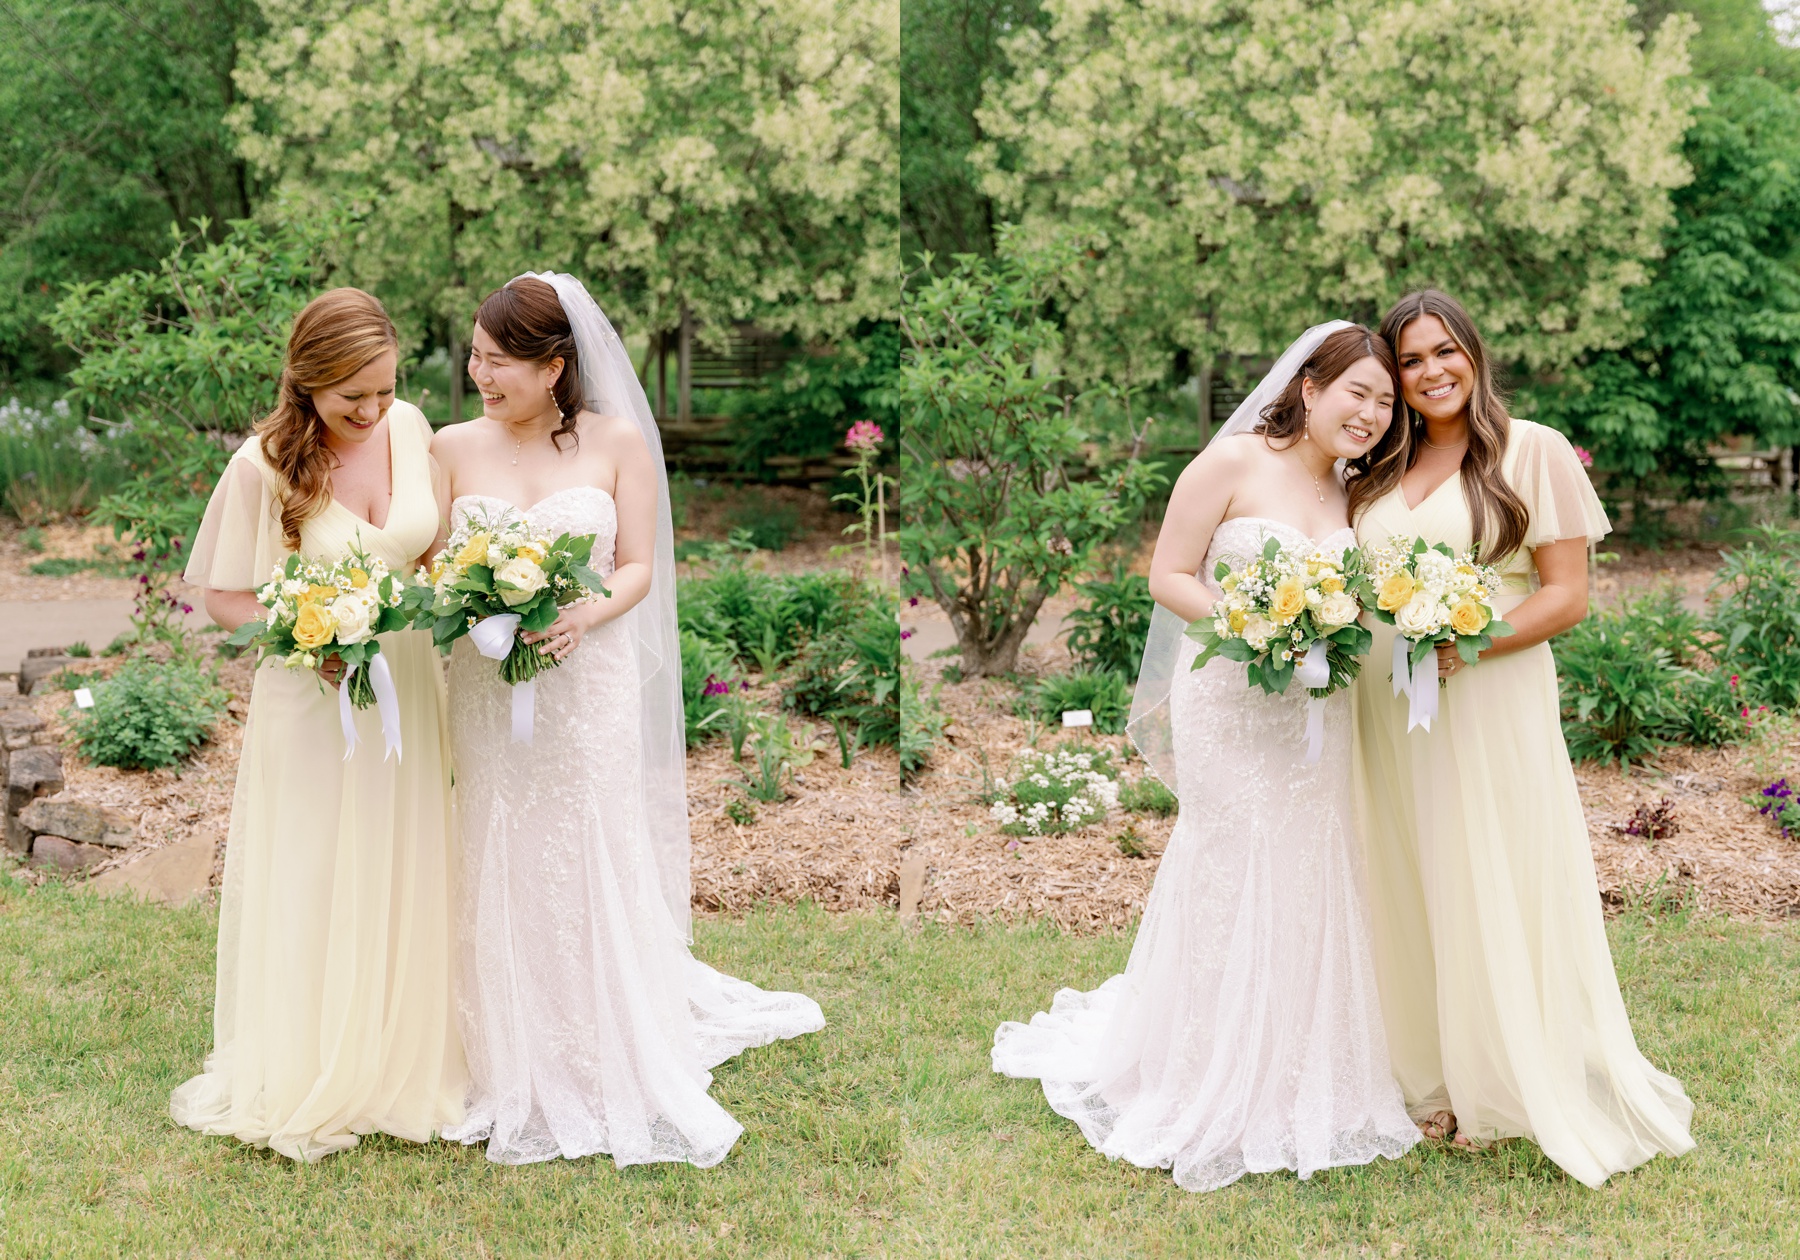 The Most Fun Wedding at Botanical Garden of the Ozarks